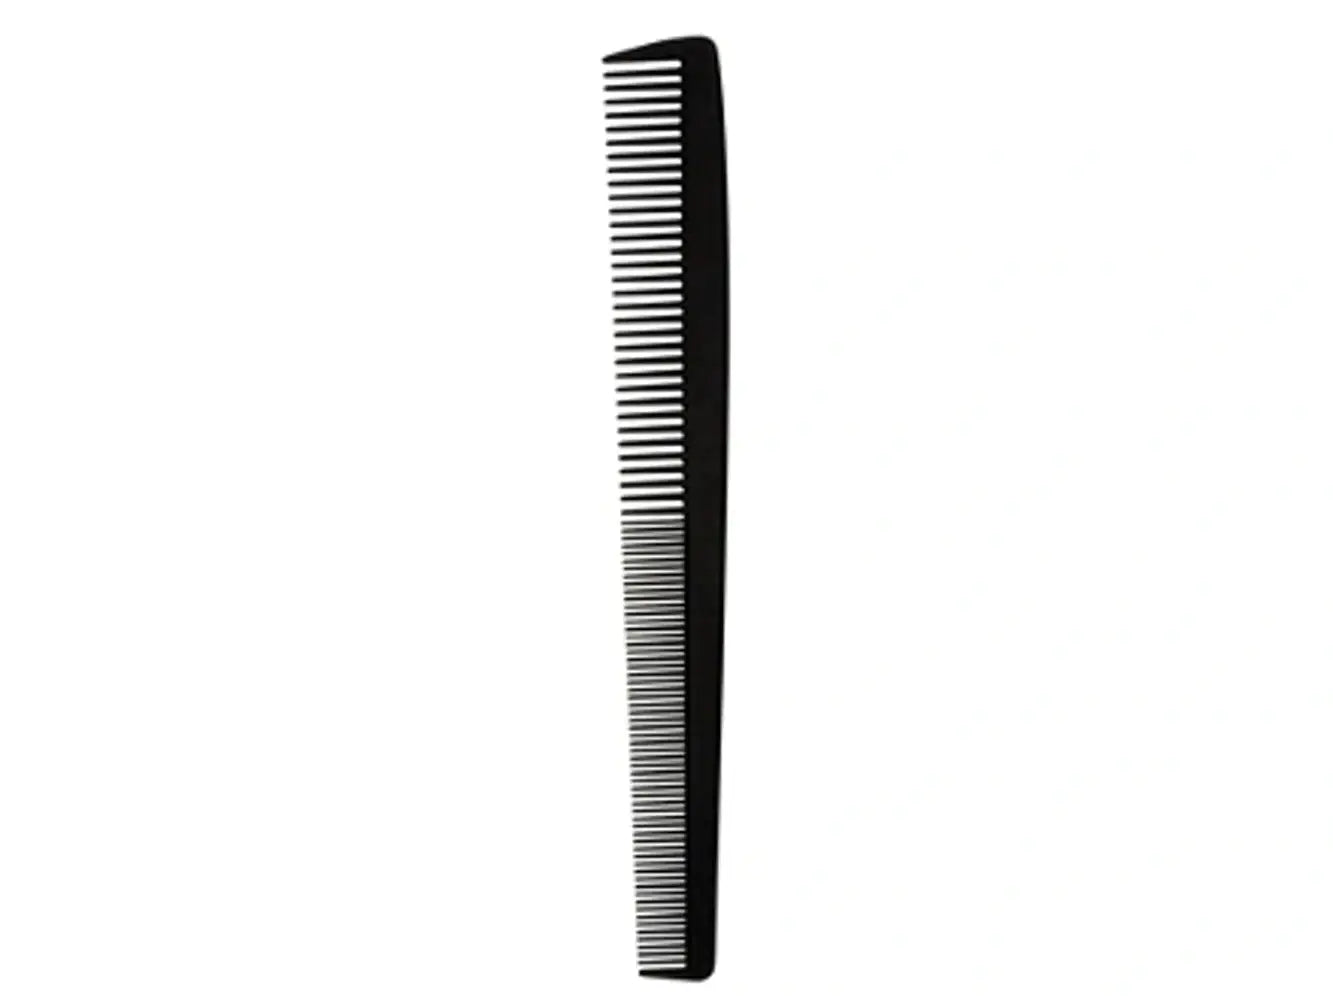 Load image into Gallery viewer, Burmax Salonchic Barber Carbon Comb #9176 – 7″
